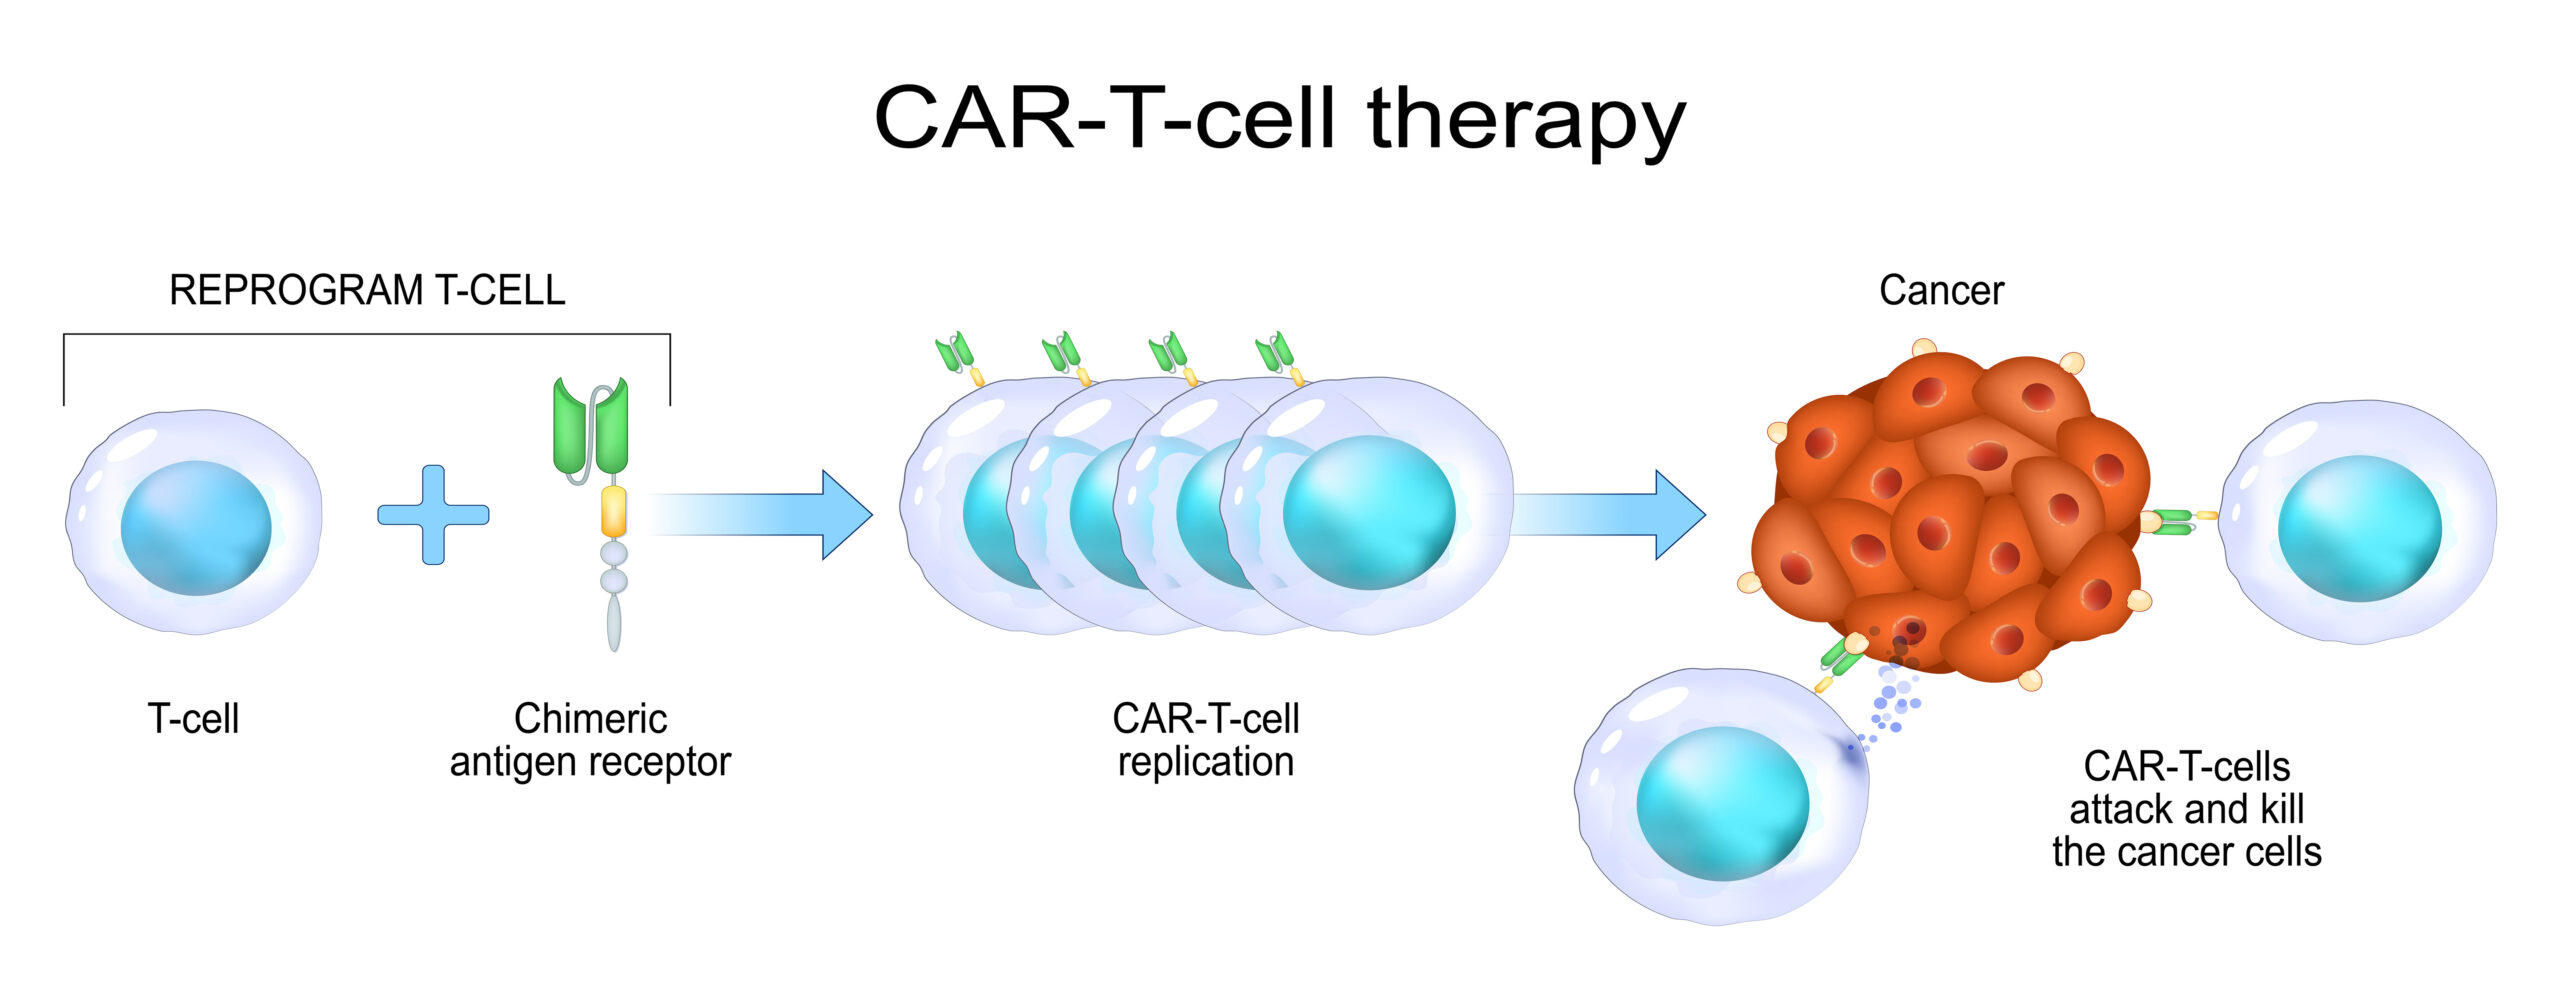 Mechanism of action of CAR-T therapy.